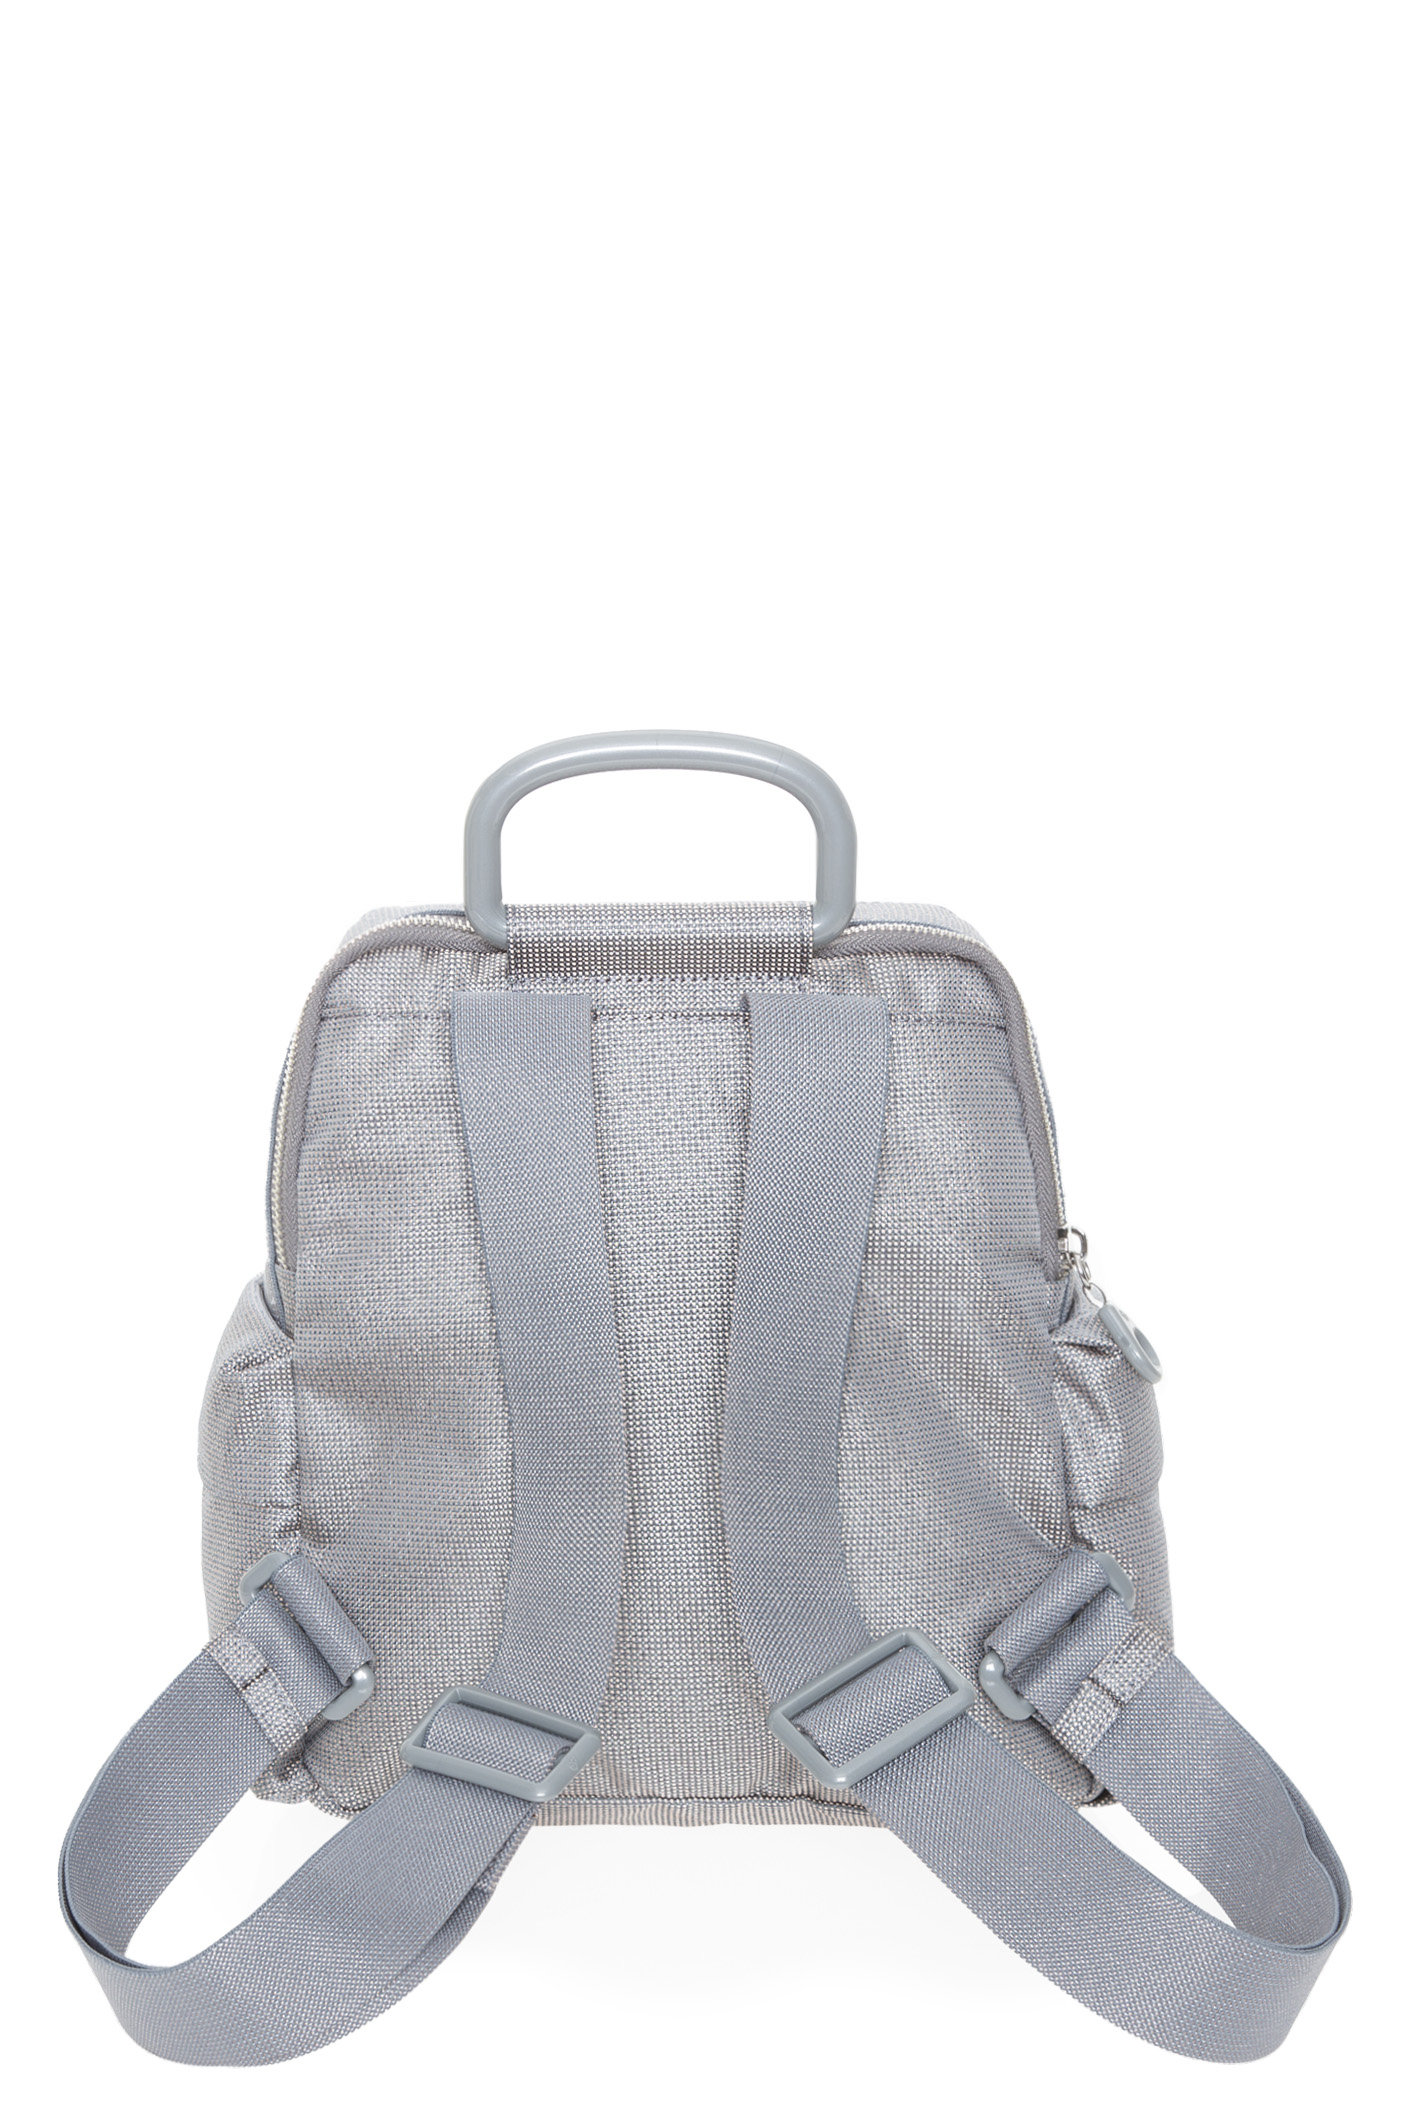 MD20 LUX BACKPACK